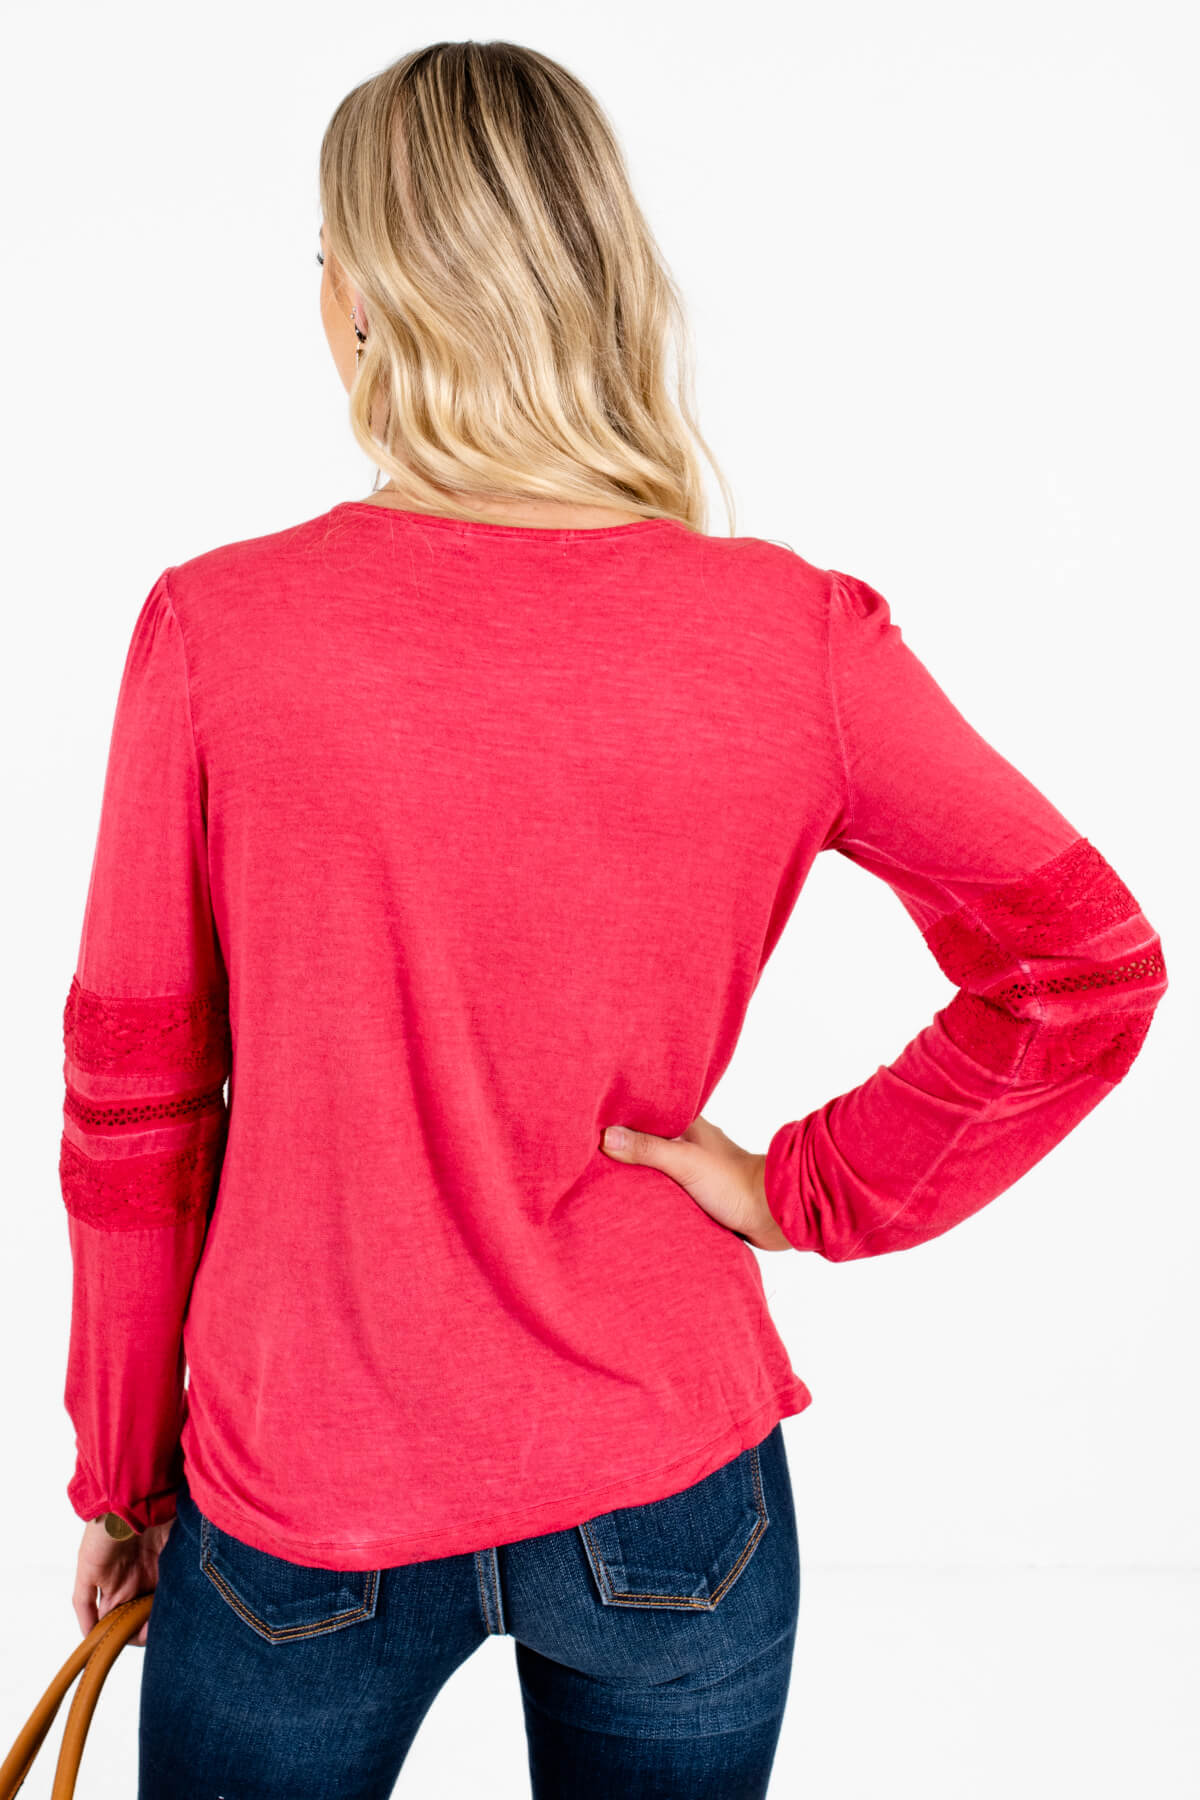 Women’s Red Long Sleeve Boutique Tops